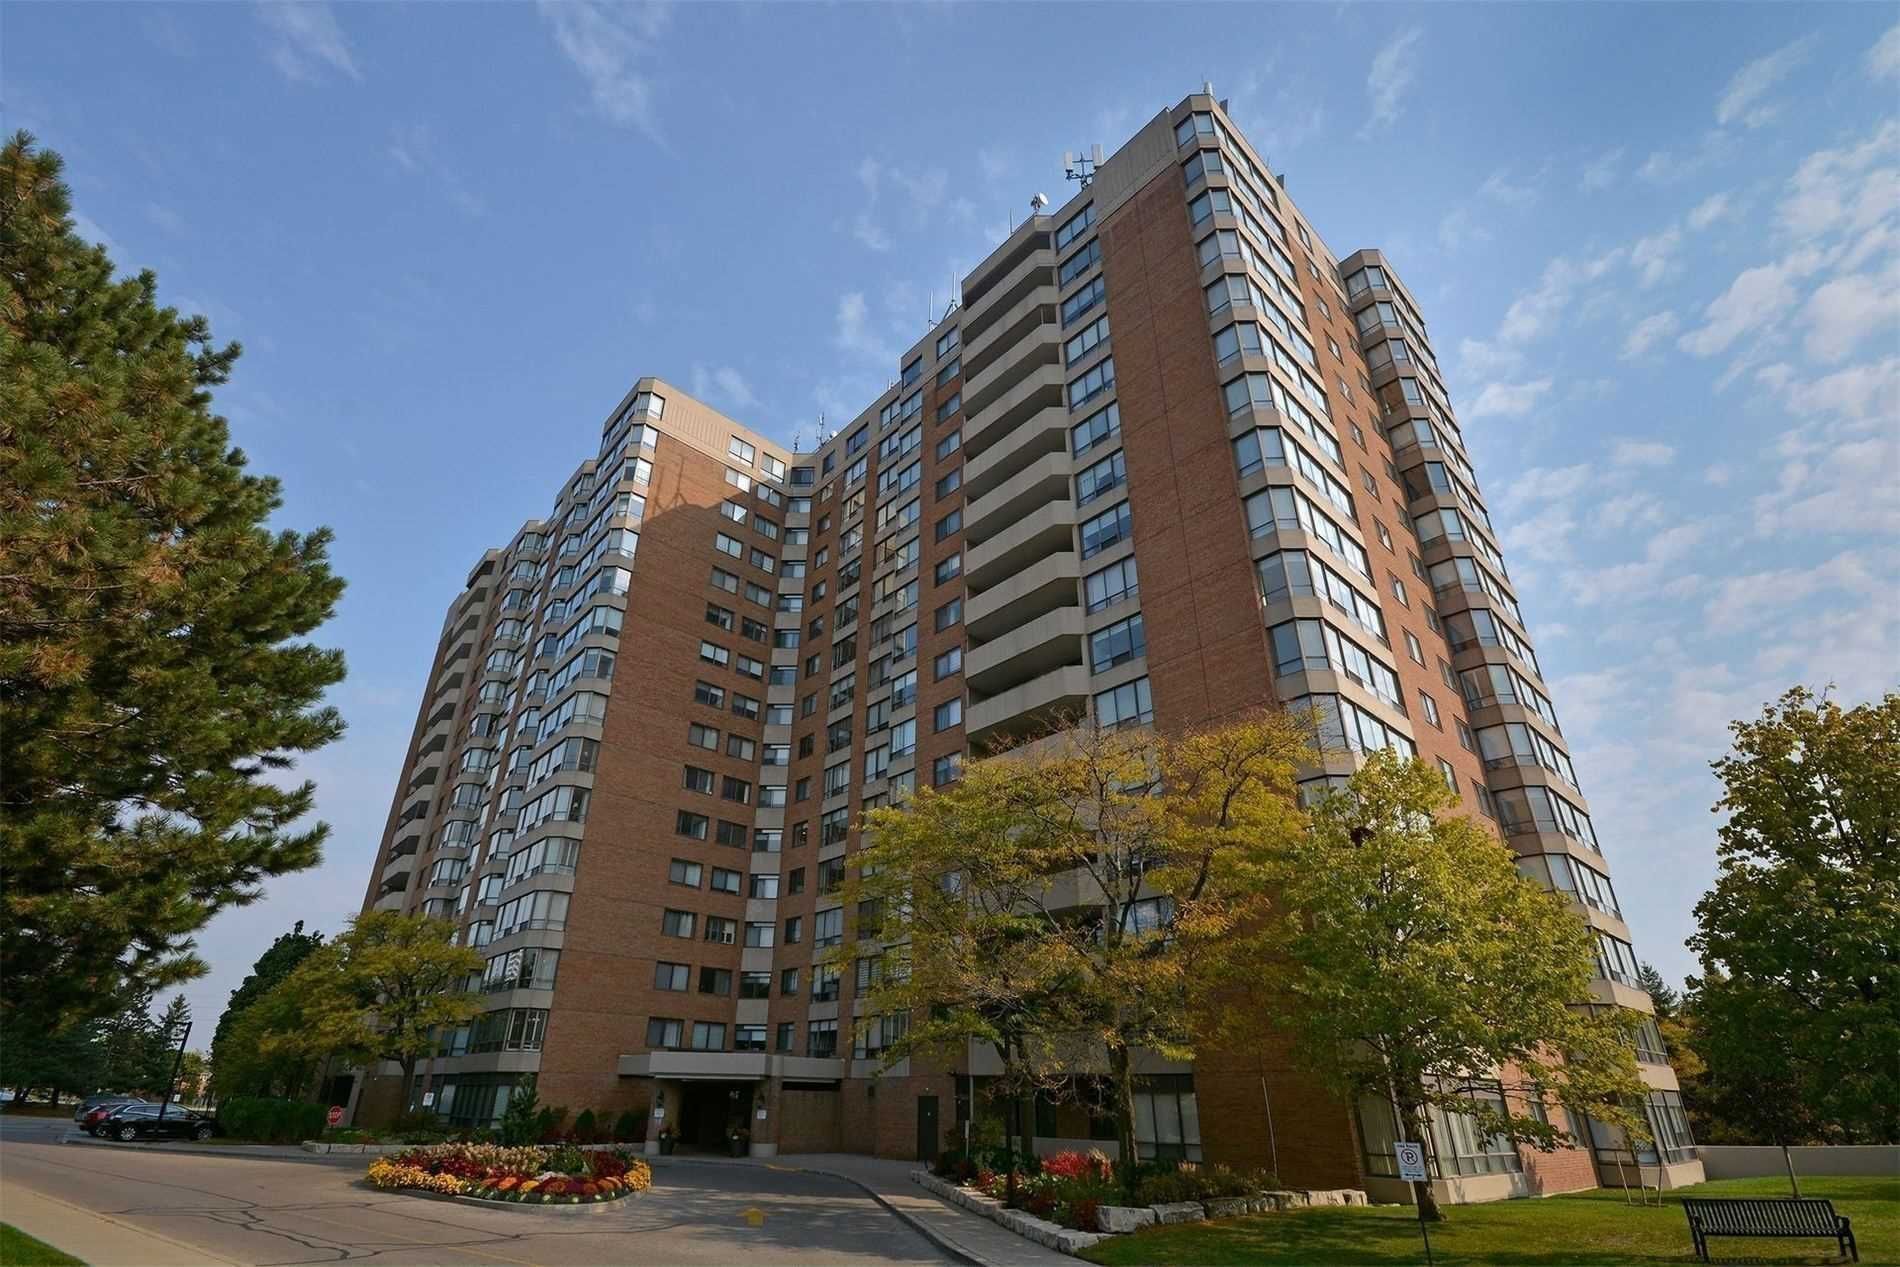 7601 Bathurst St. This condo at 7601 Bathurst Condo is located in  Vaughan, Toronto - image #1 of 2 by Strata.ca